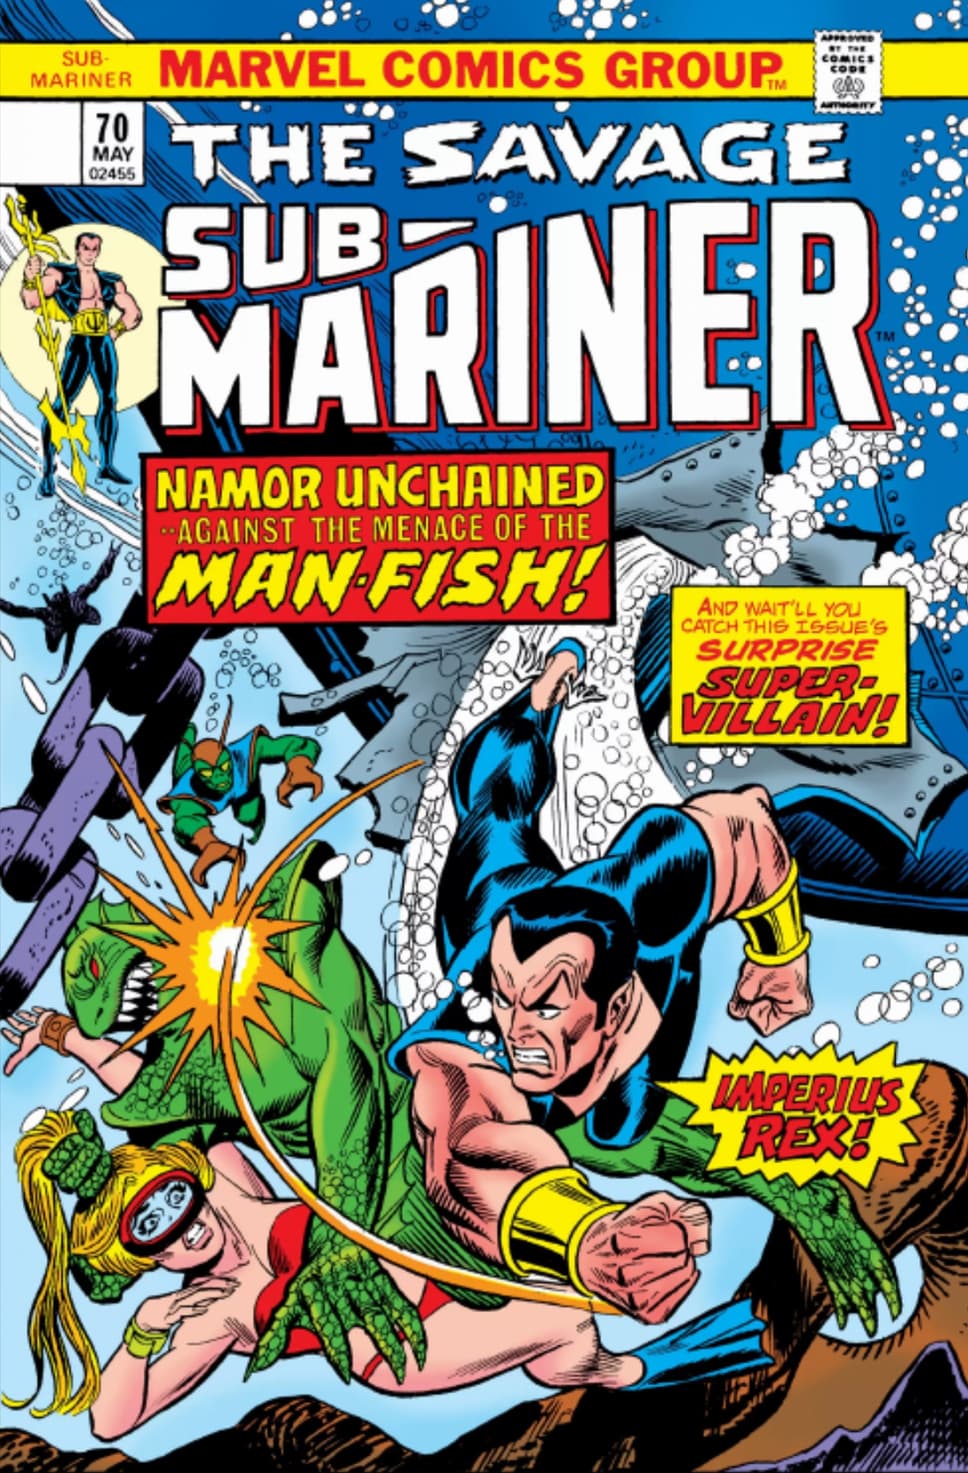 SUB-MARINER (1968) #70 cover by George Tuska, Vince Colletta and Stan Goldberg